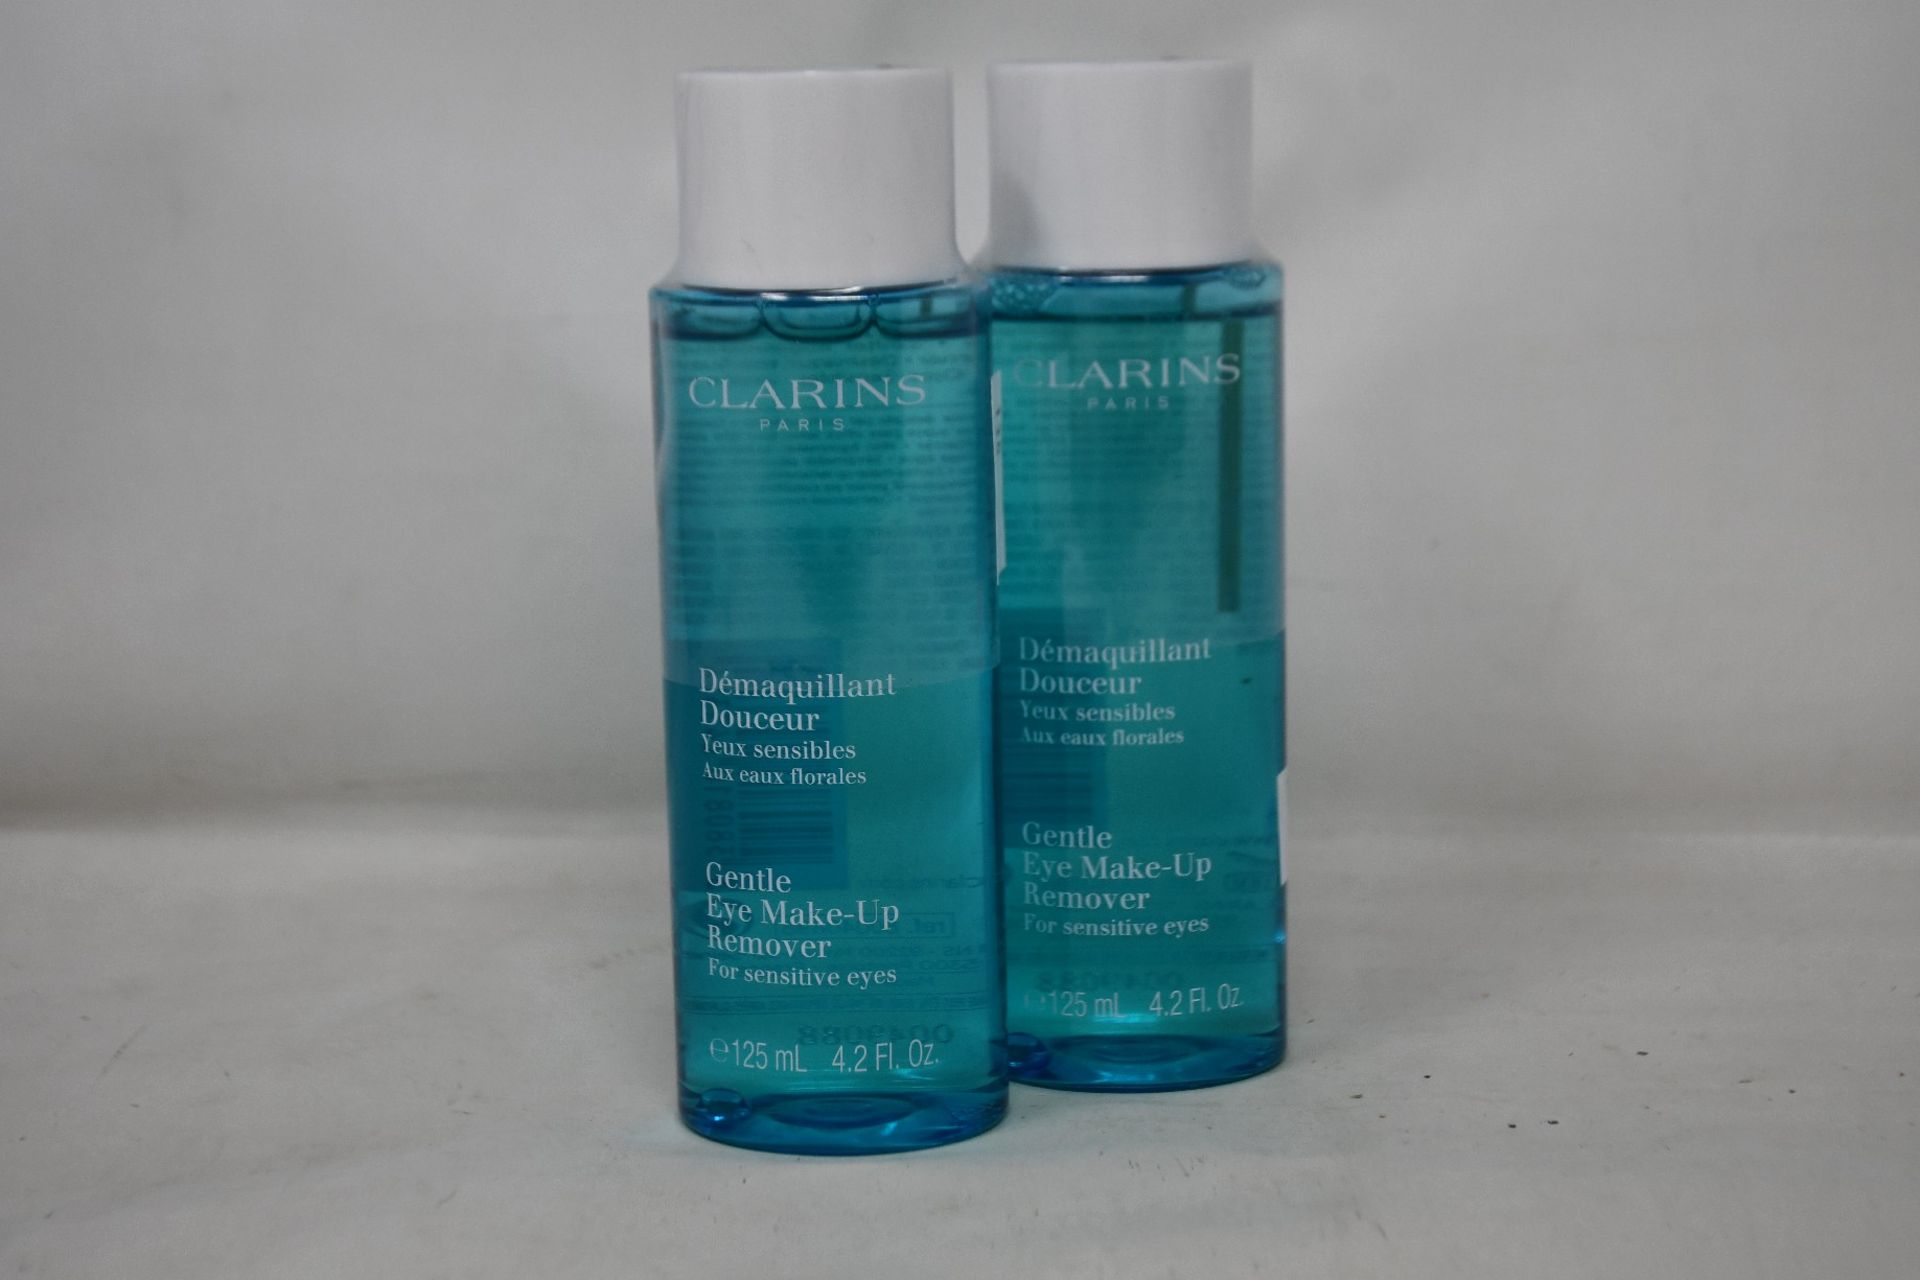 Five as new Clarins gentle eye make-up remover for sensitive eyes (5 x 125ml).